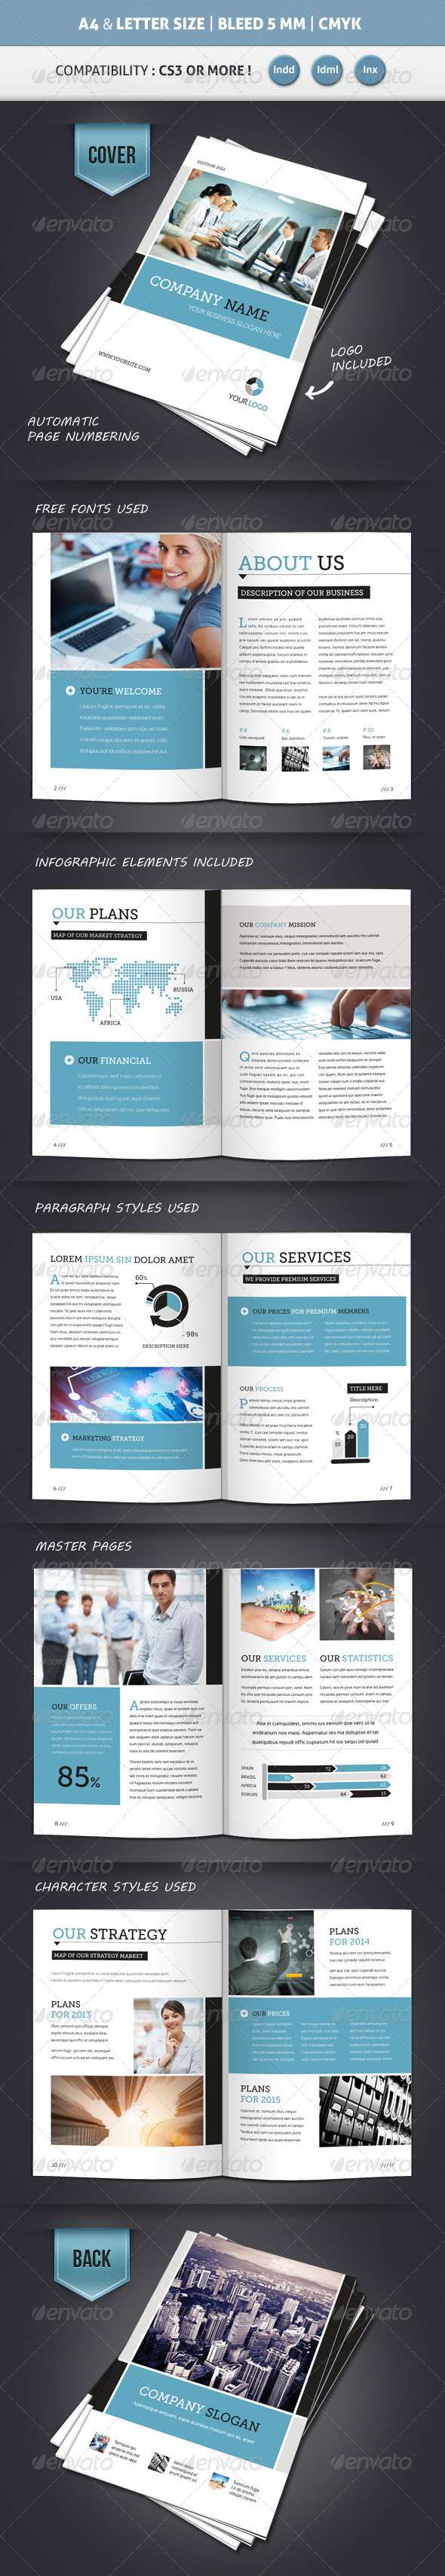 12 Pages Brochure Template InDesign